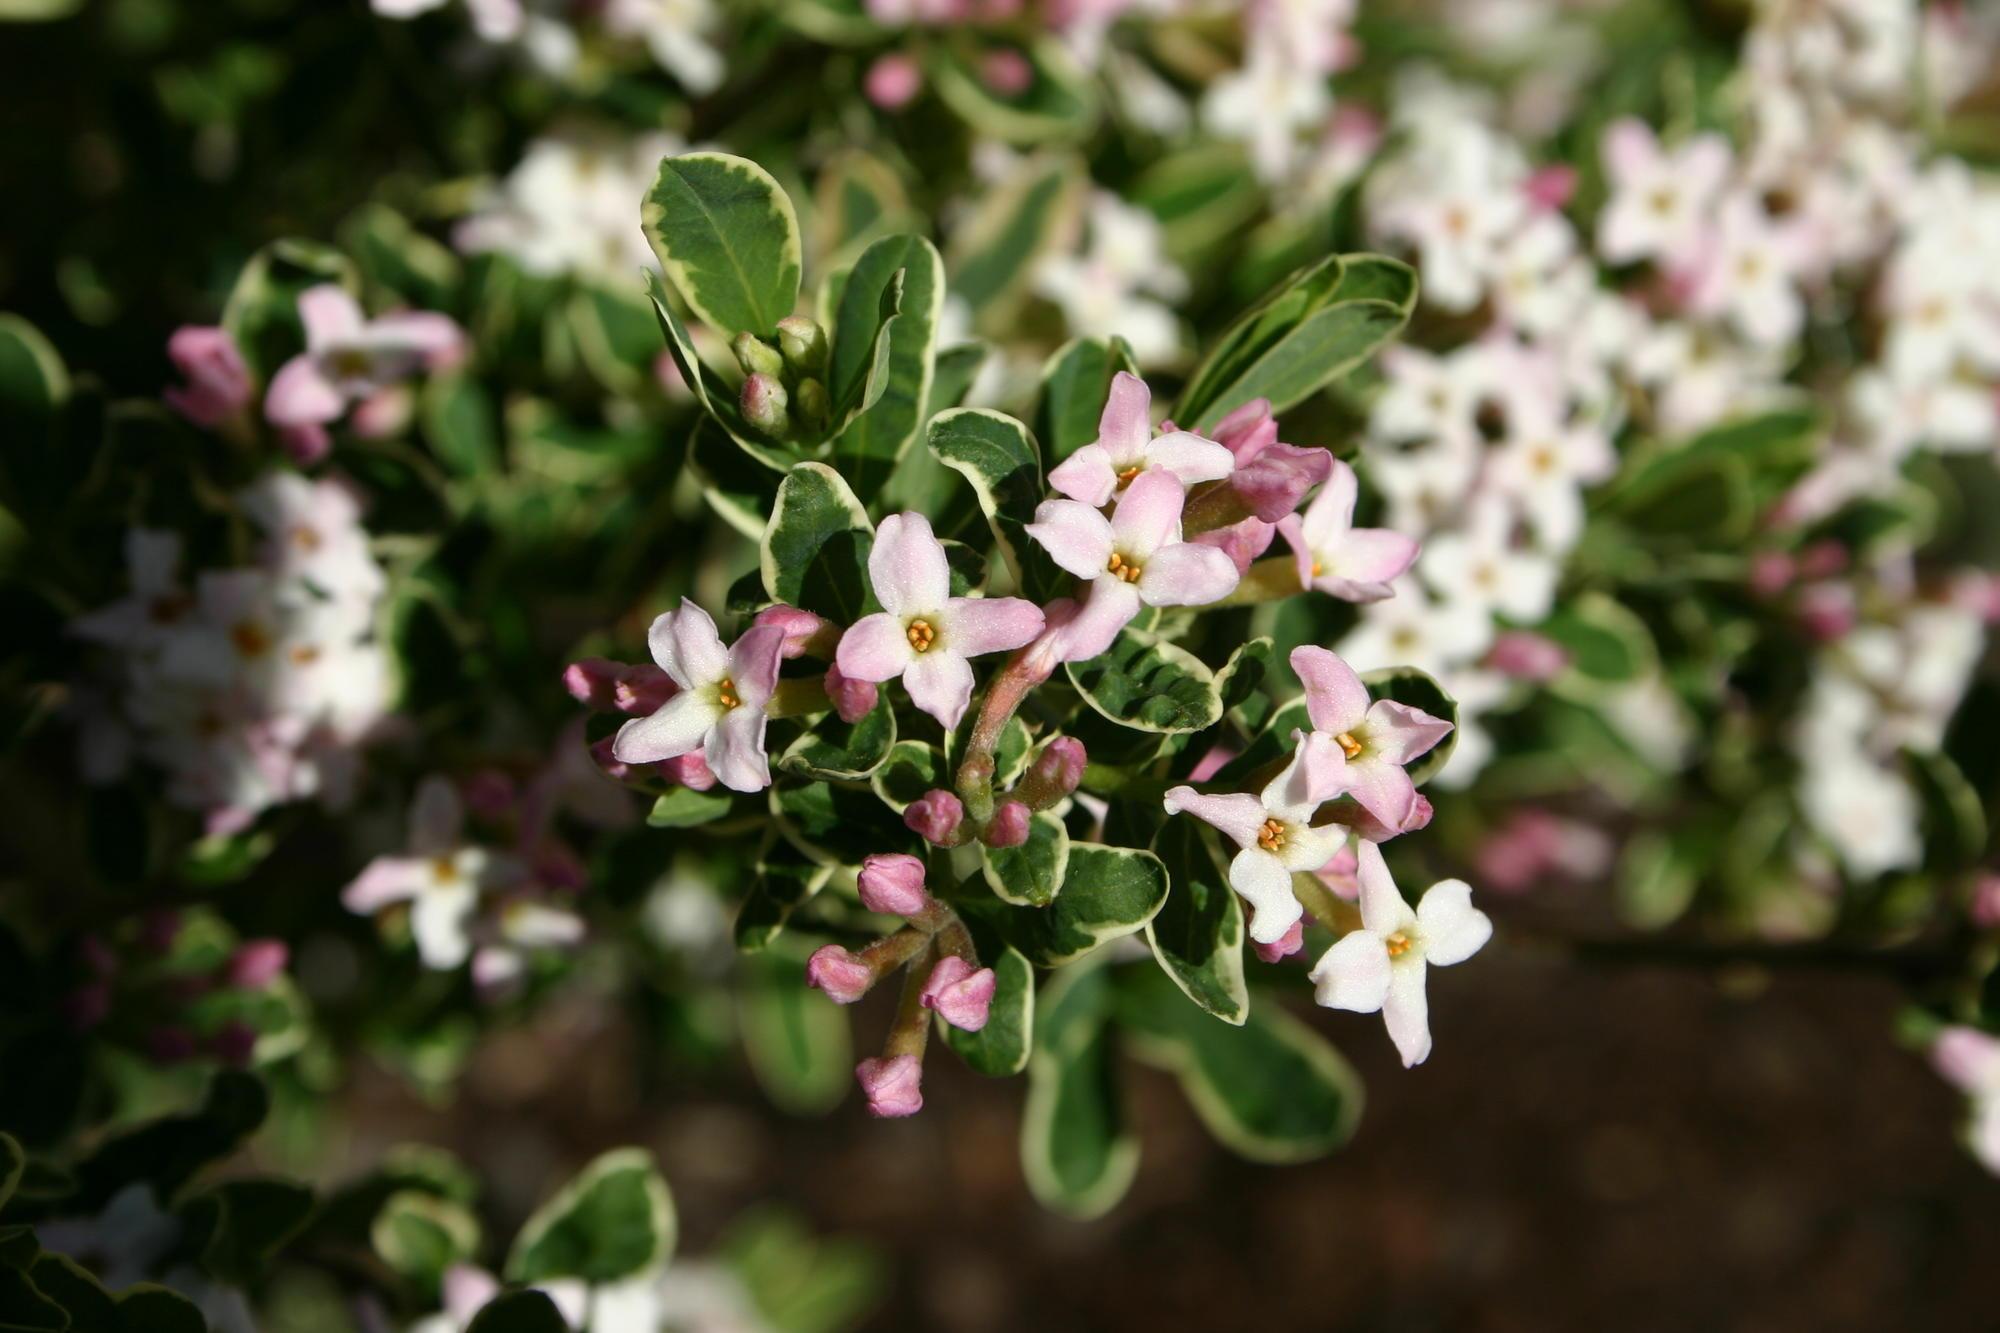 small light pink flowers and tight evergreen foliage